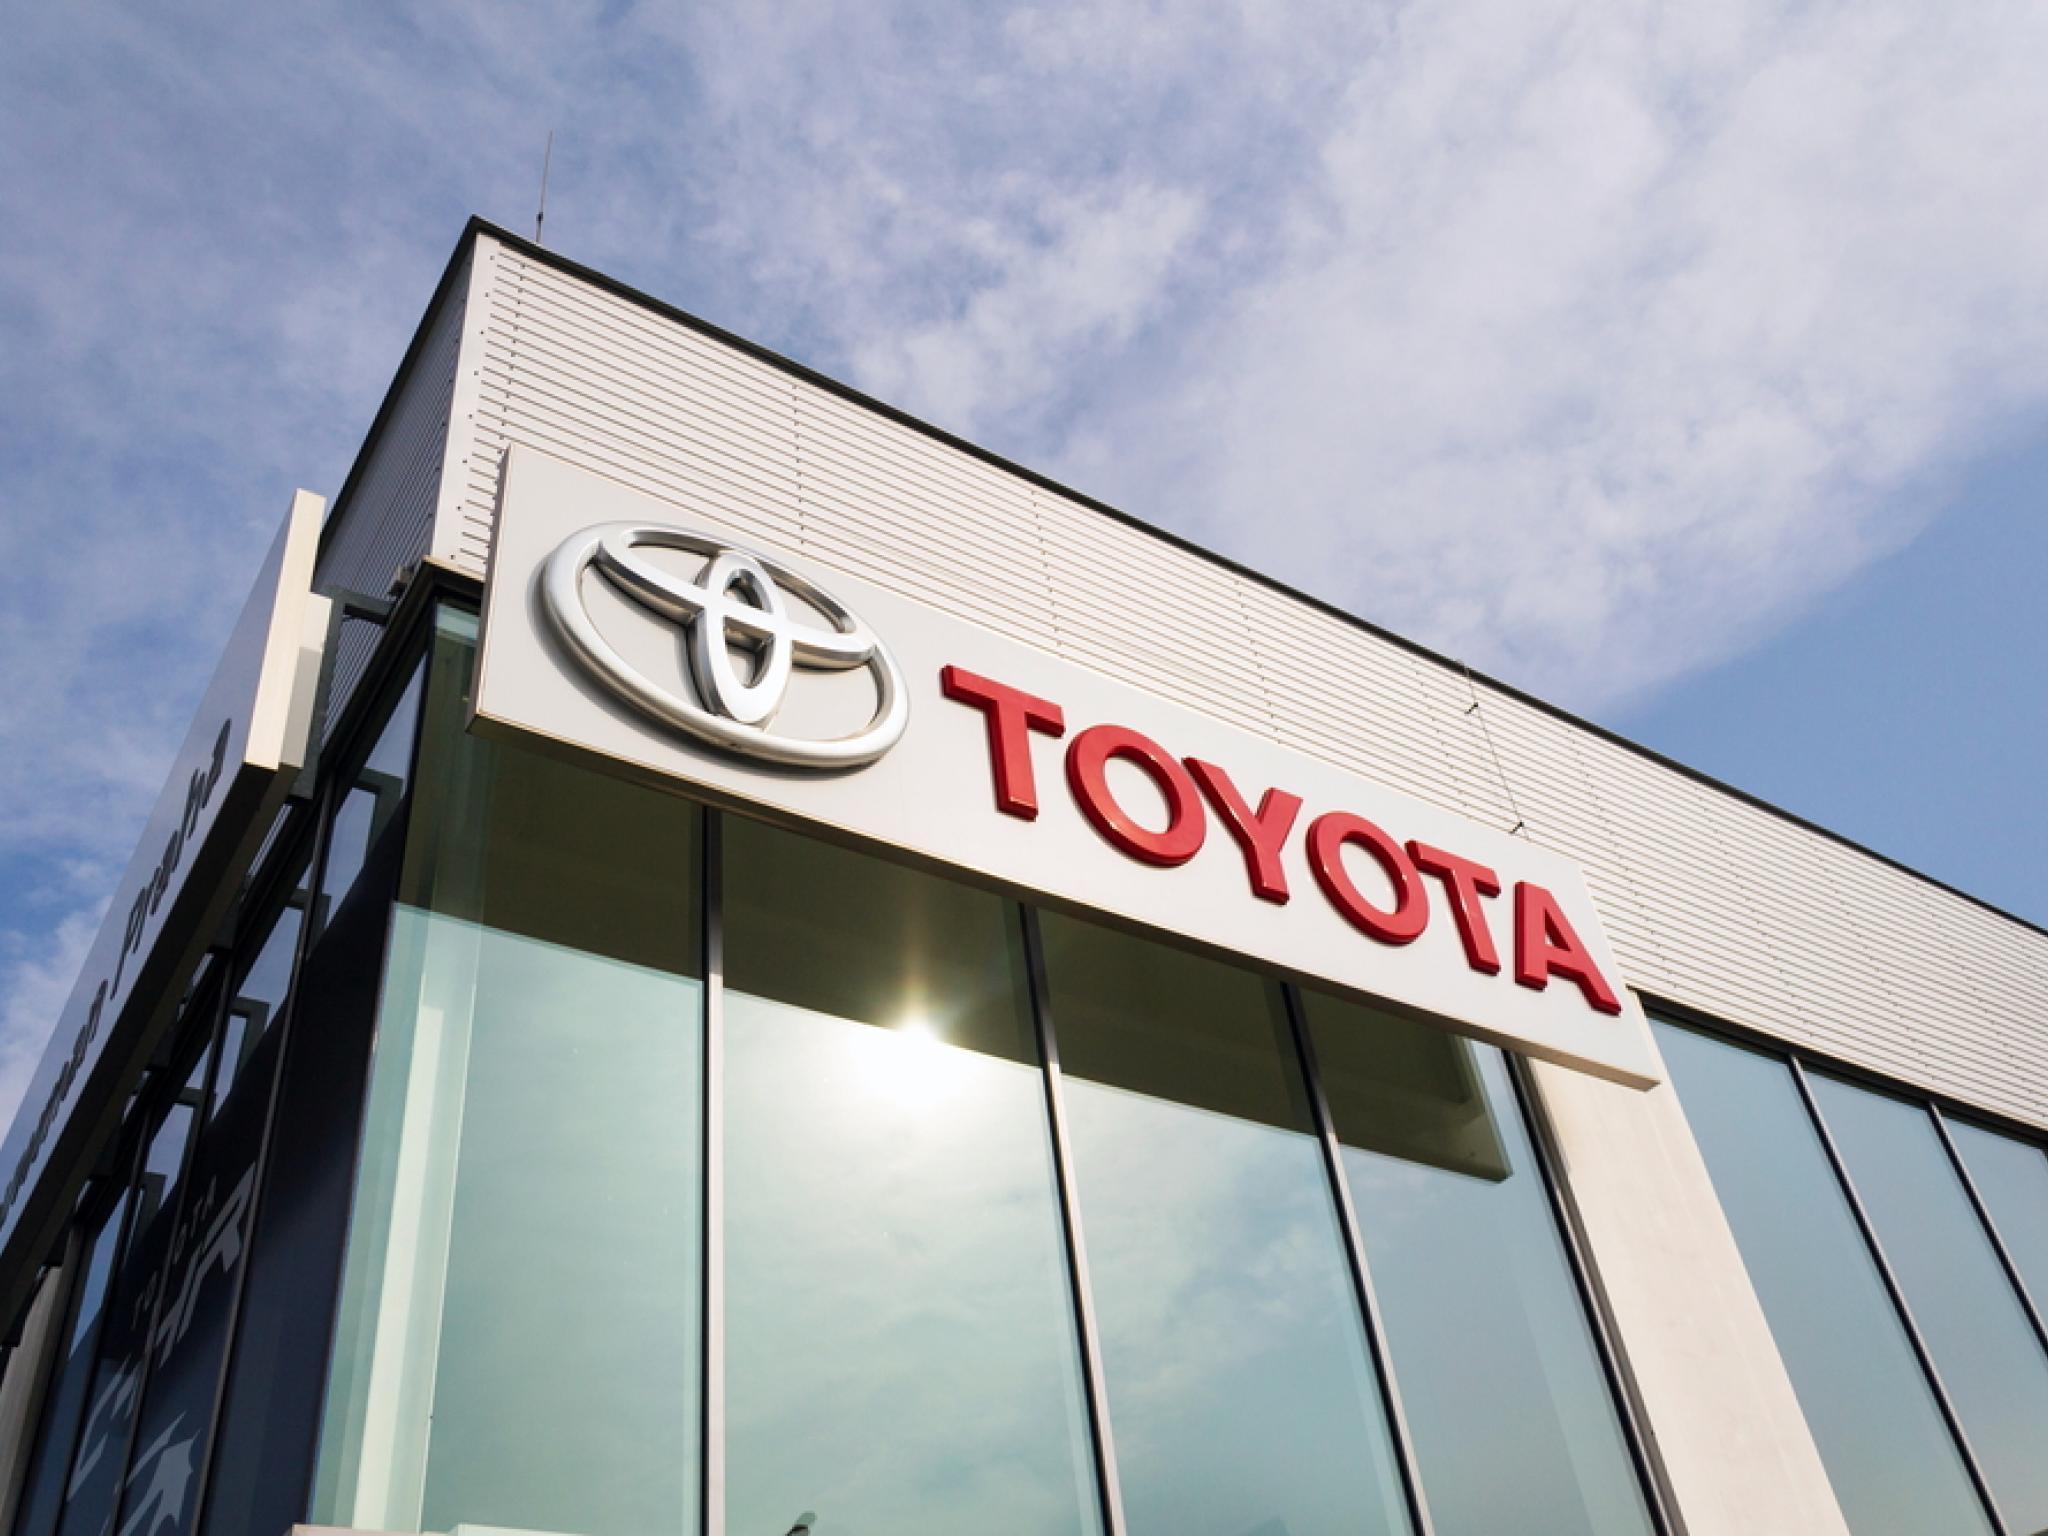  toyota-chairmans-pay-hits-10m-despite-shareholder-concerns-and-safety-probe 